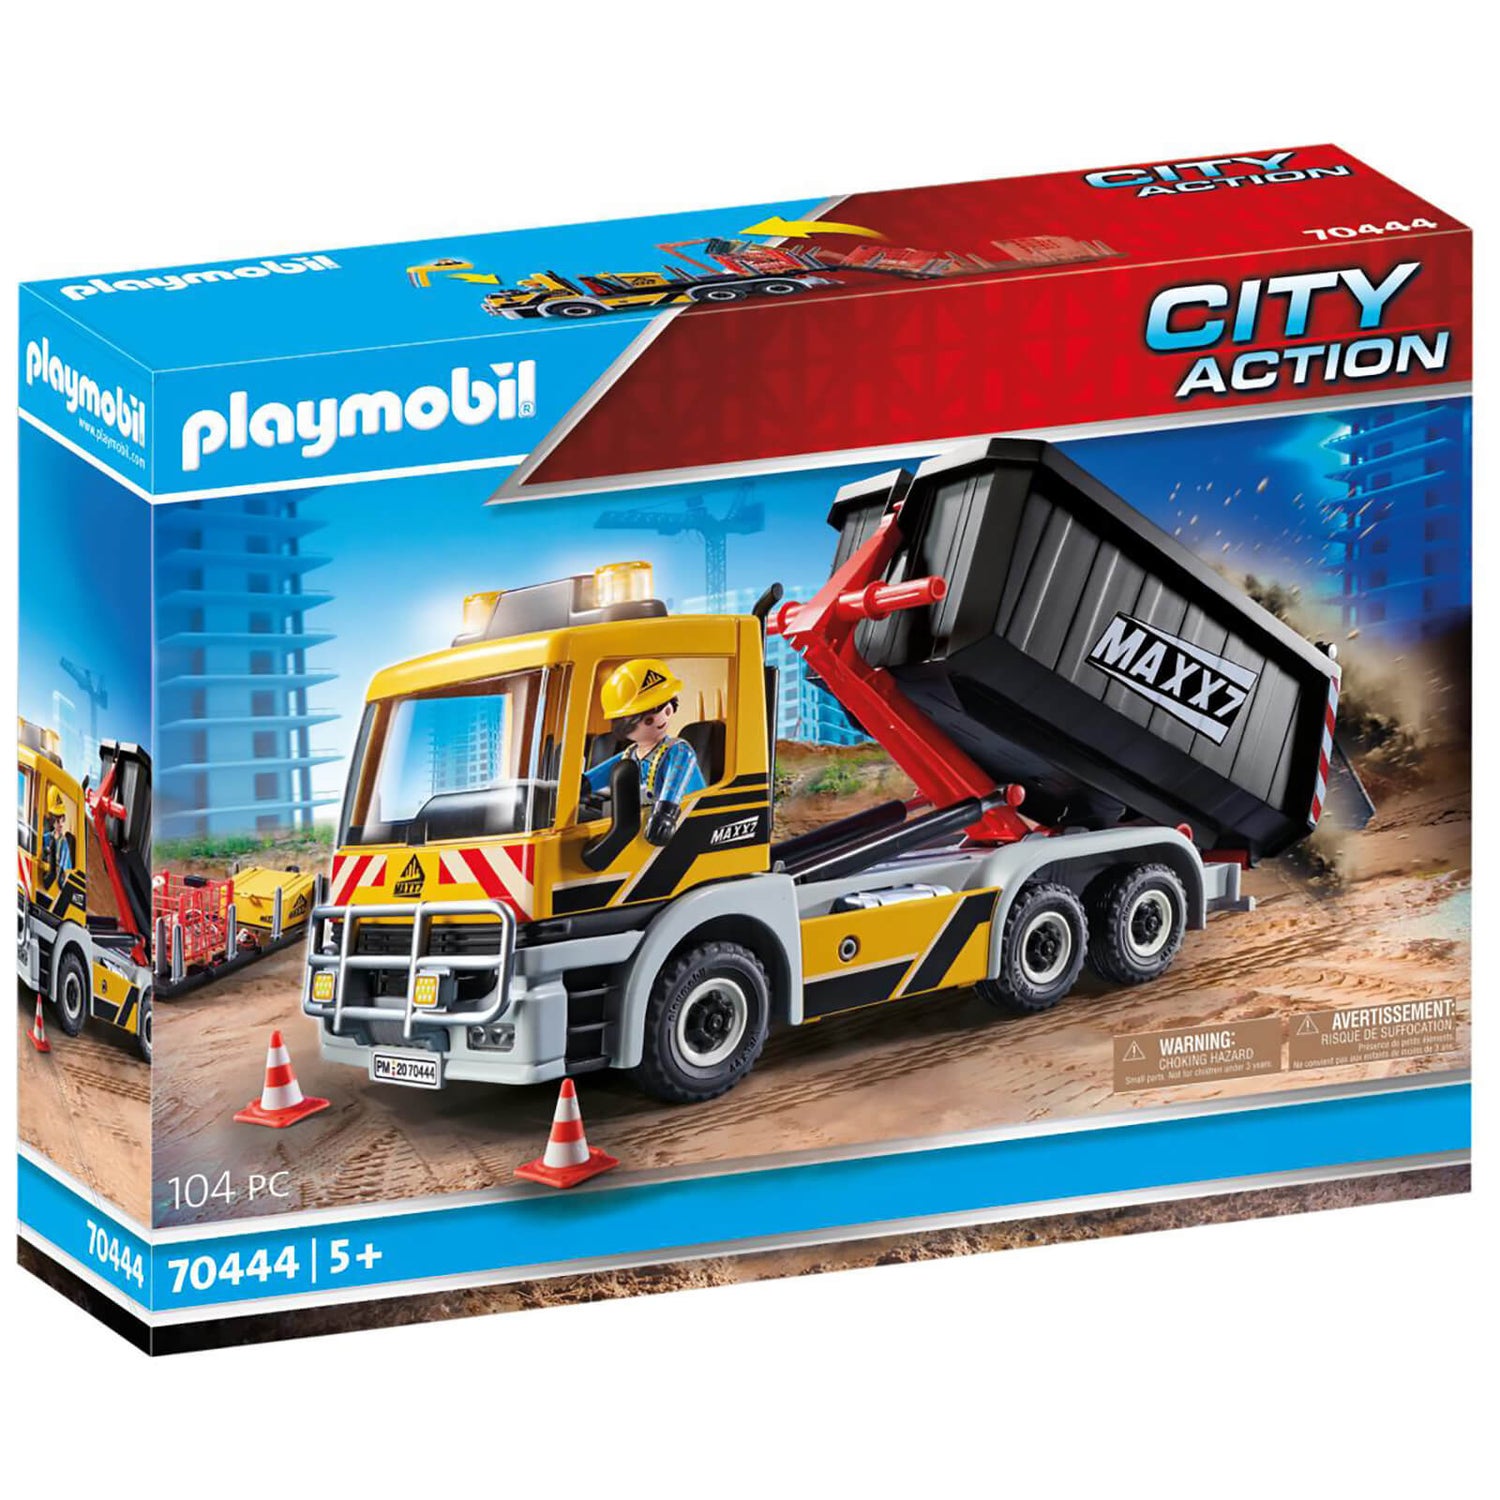 Playmobil City Action Truck (70444)